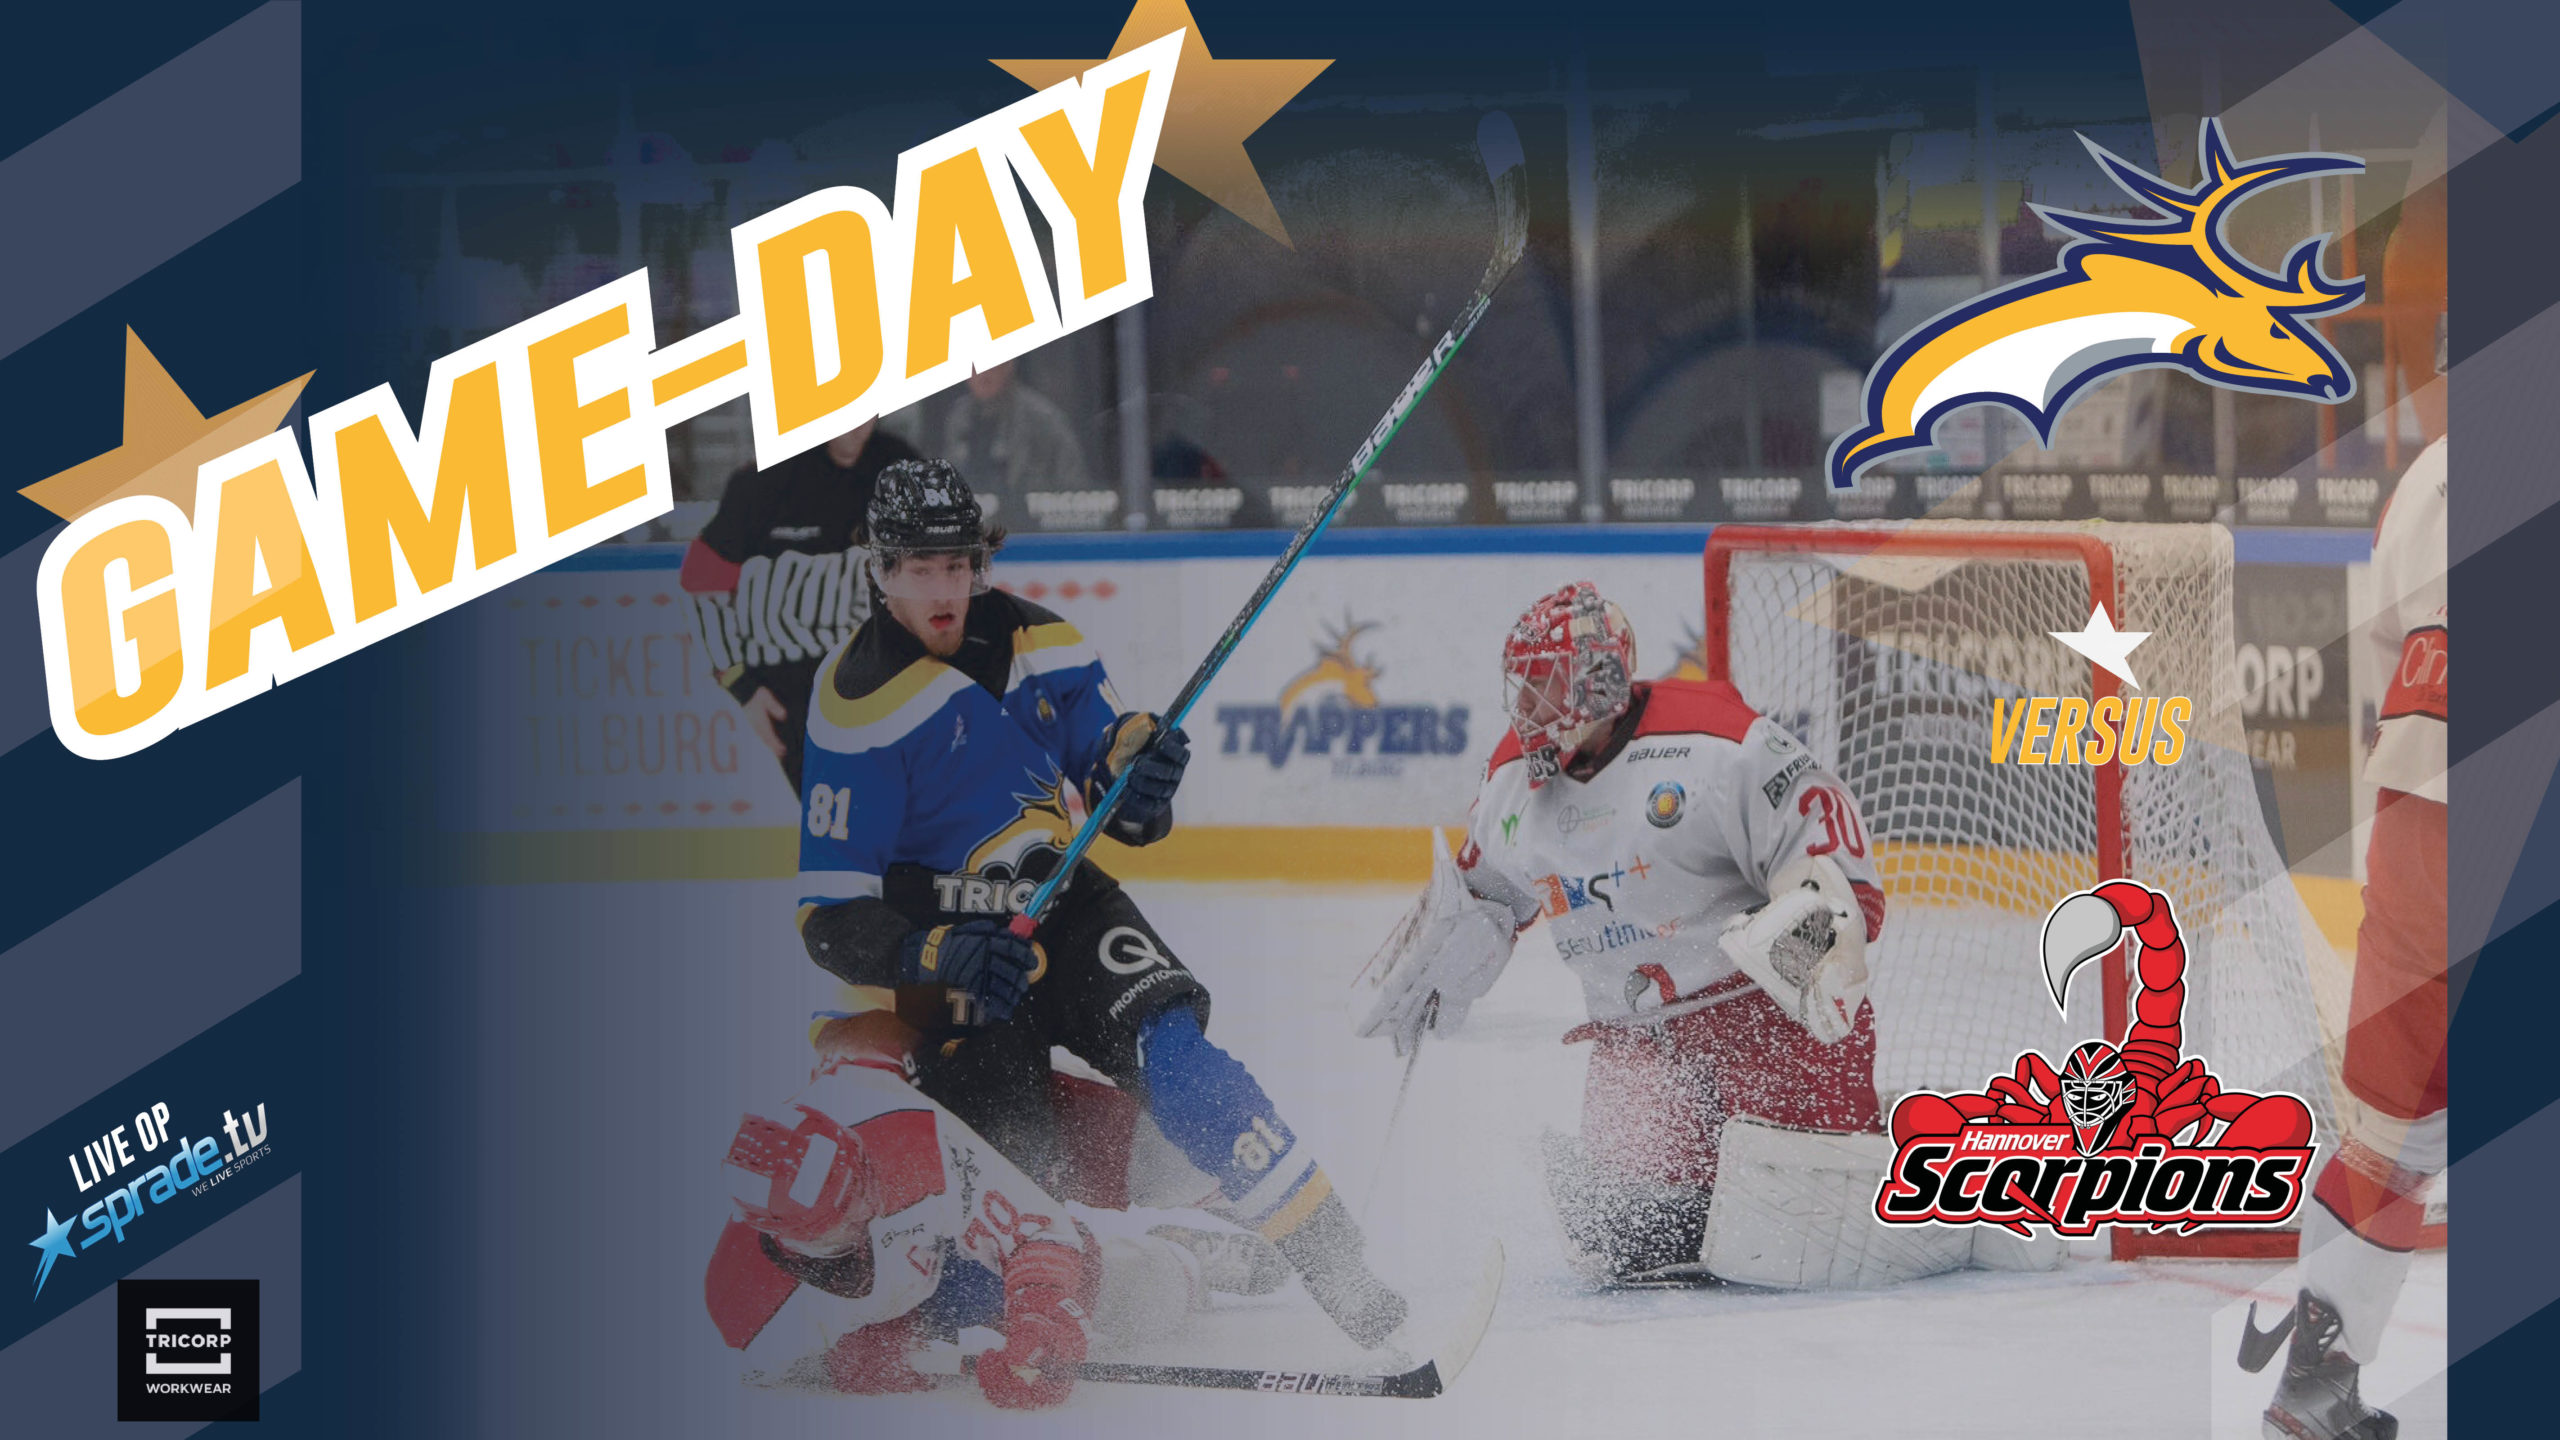 GAMEDAY: Tilburg Trappers vs. Hannover Scorpions